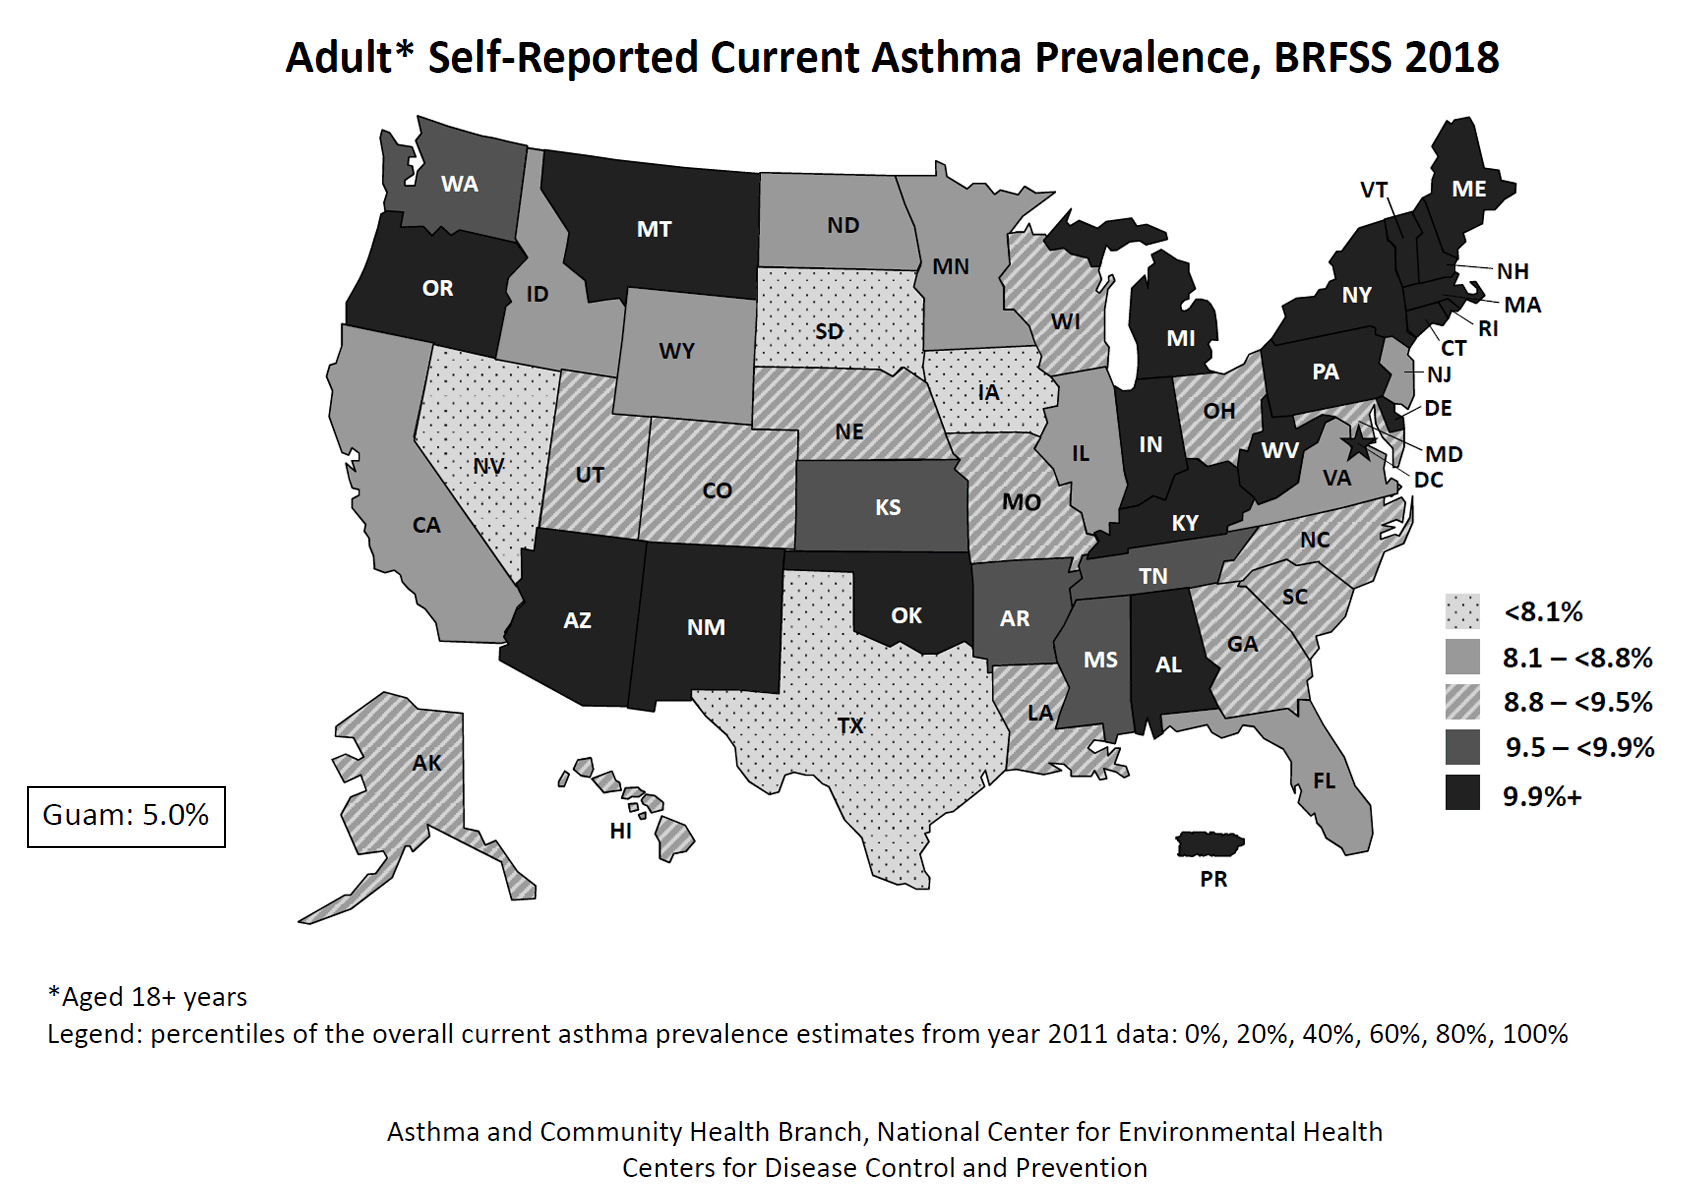 Black and white U.S. map showing adult self-reported current asthma prevalence by state for BRFSS 2018